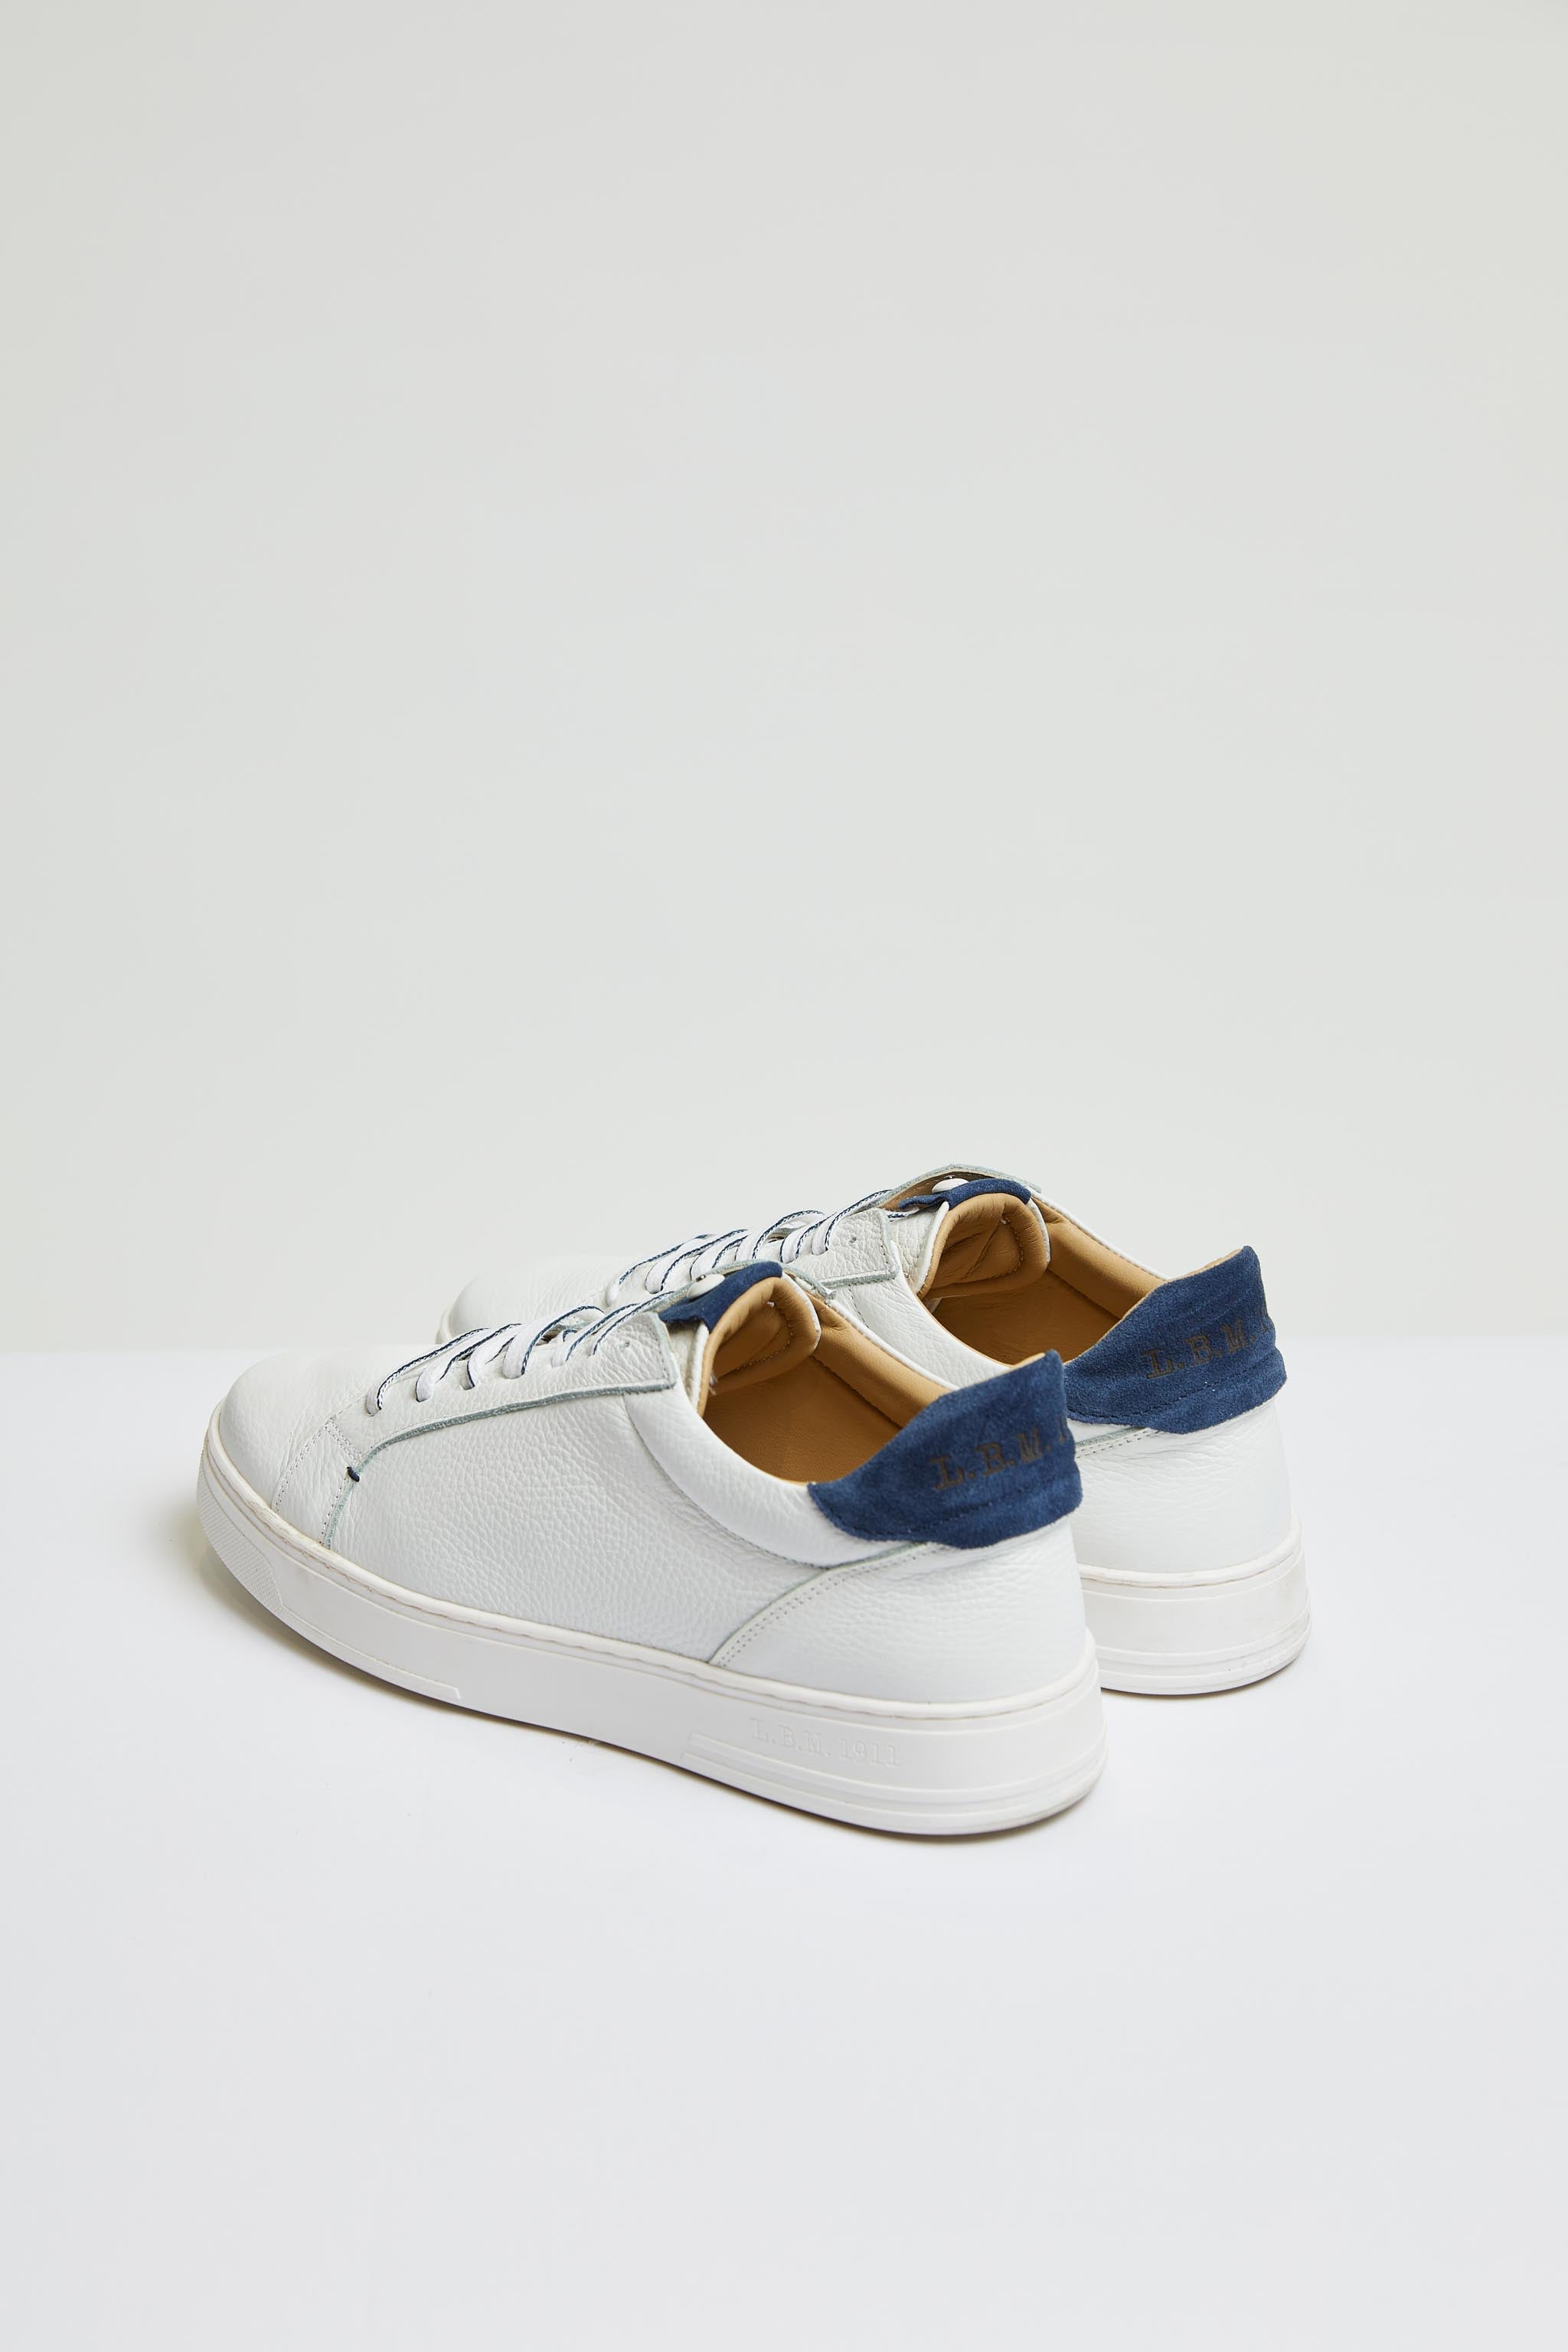 Retro-styled tennis shoe in blue